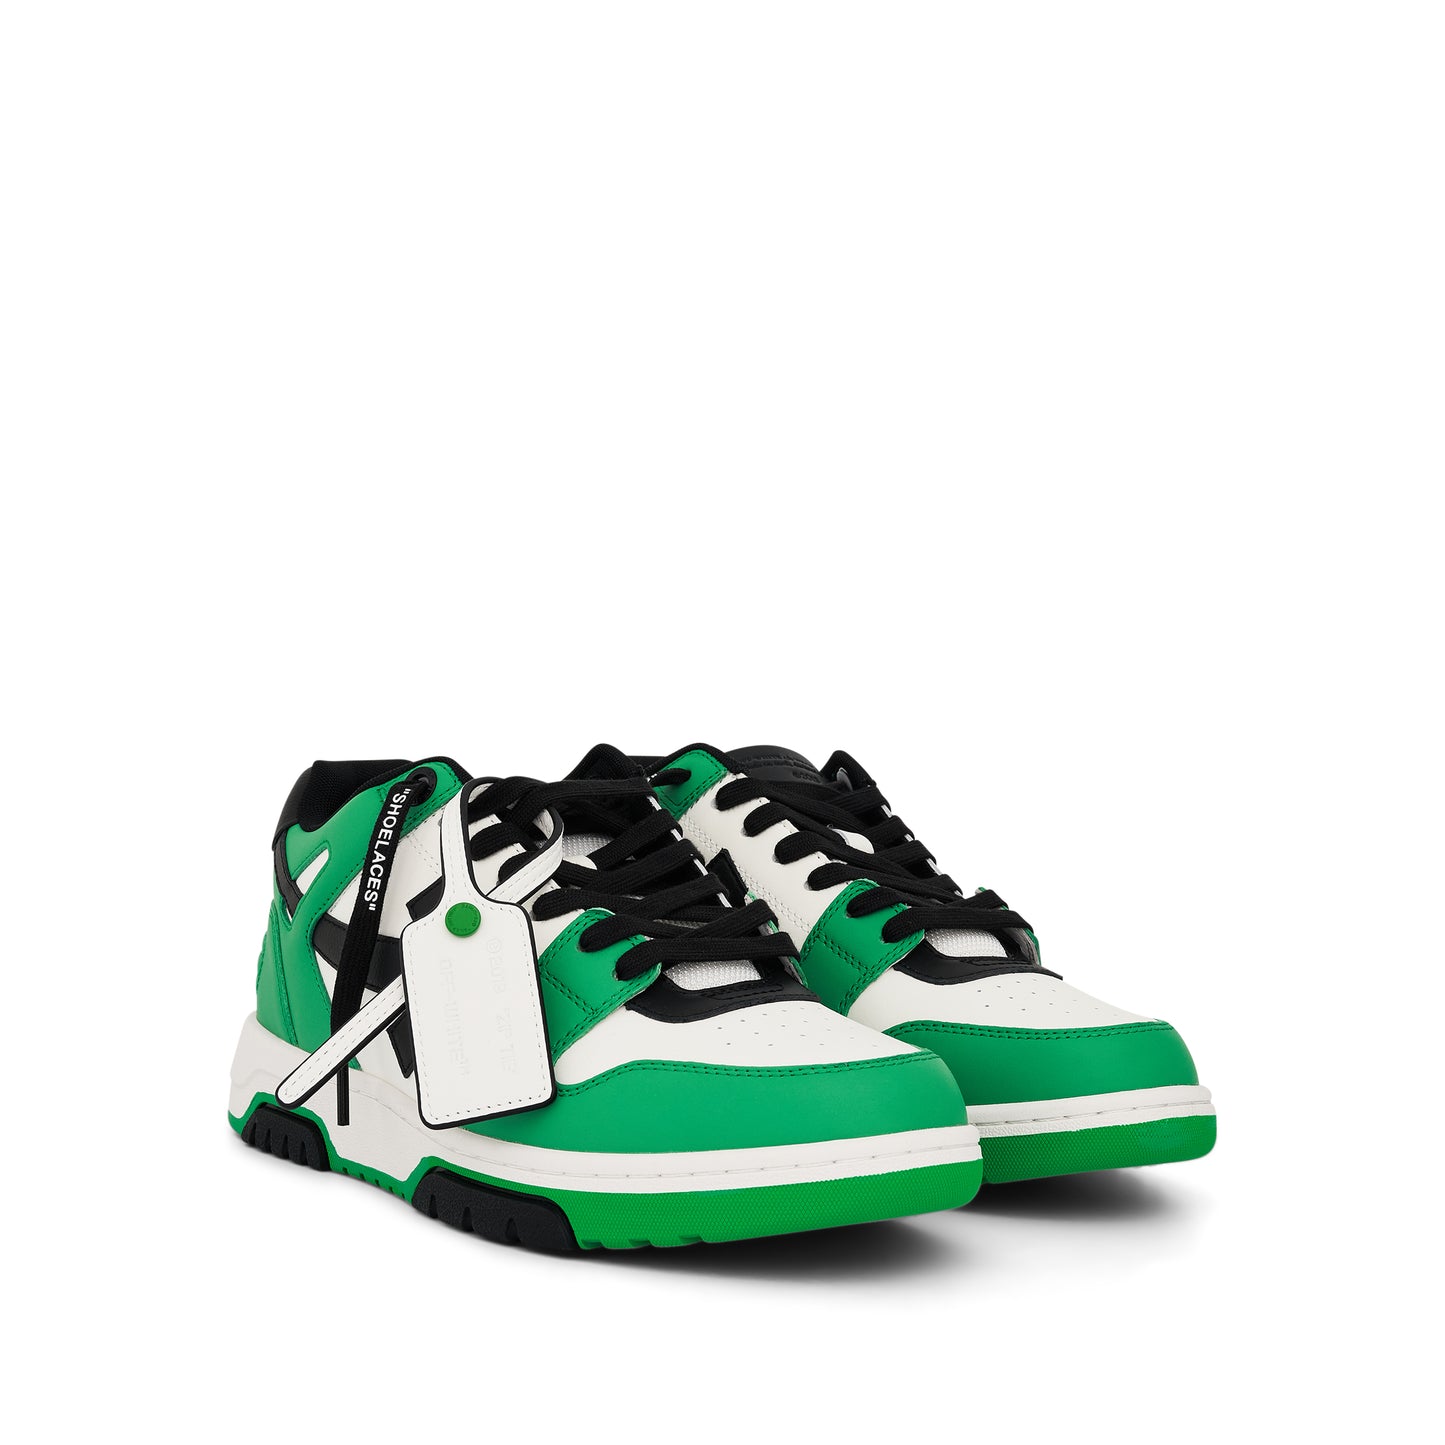 Out of Office Calf Leather Sneaker Green/Black